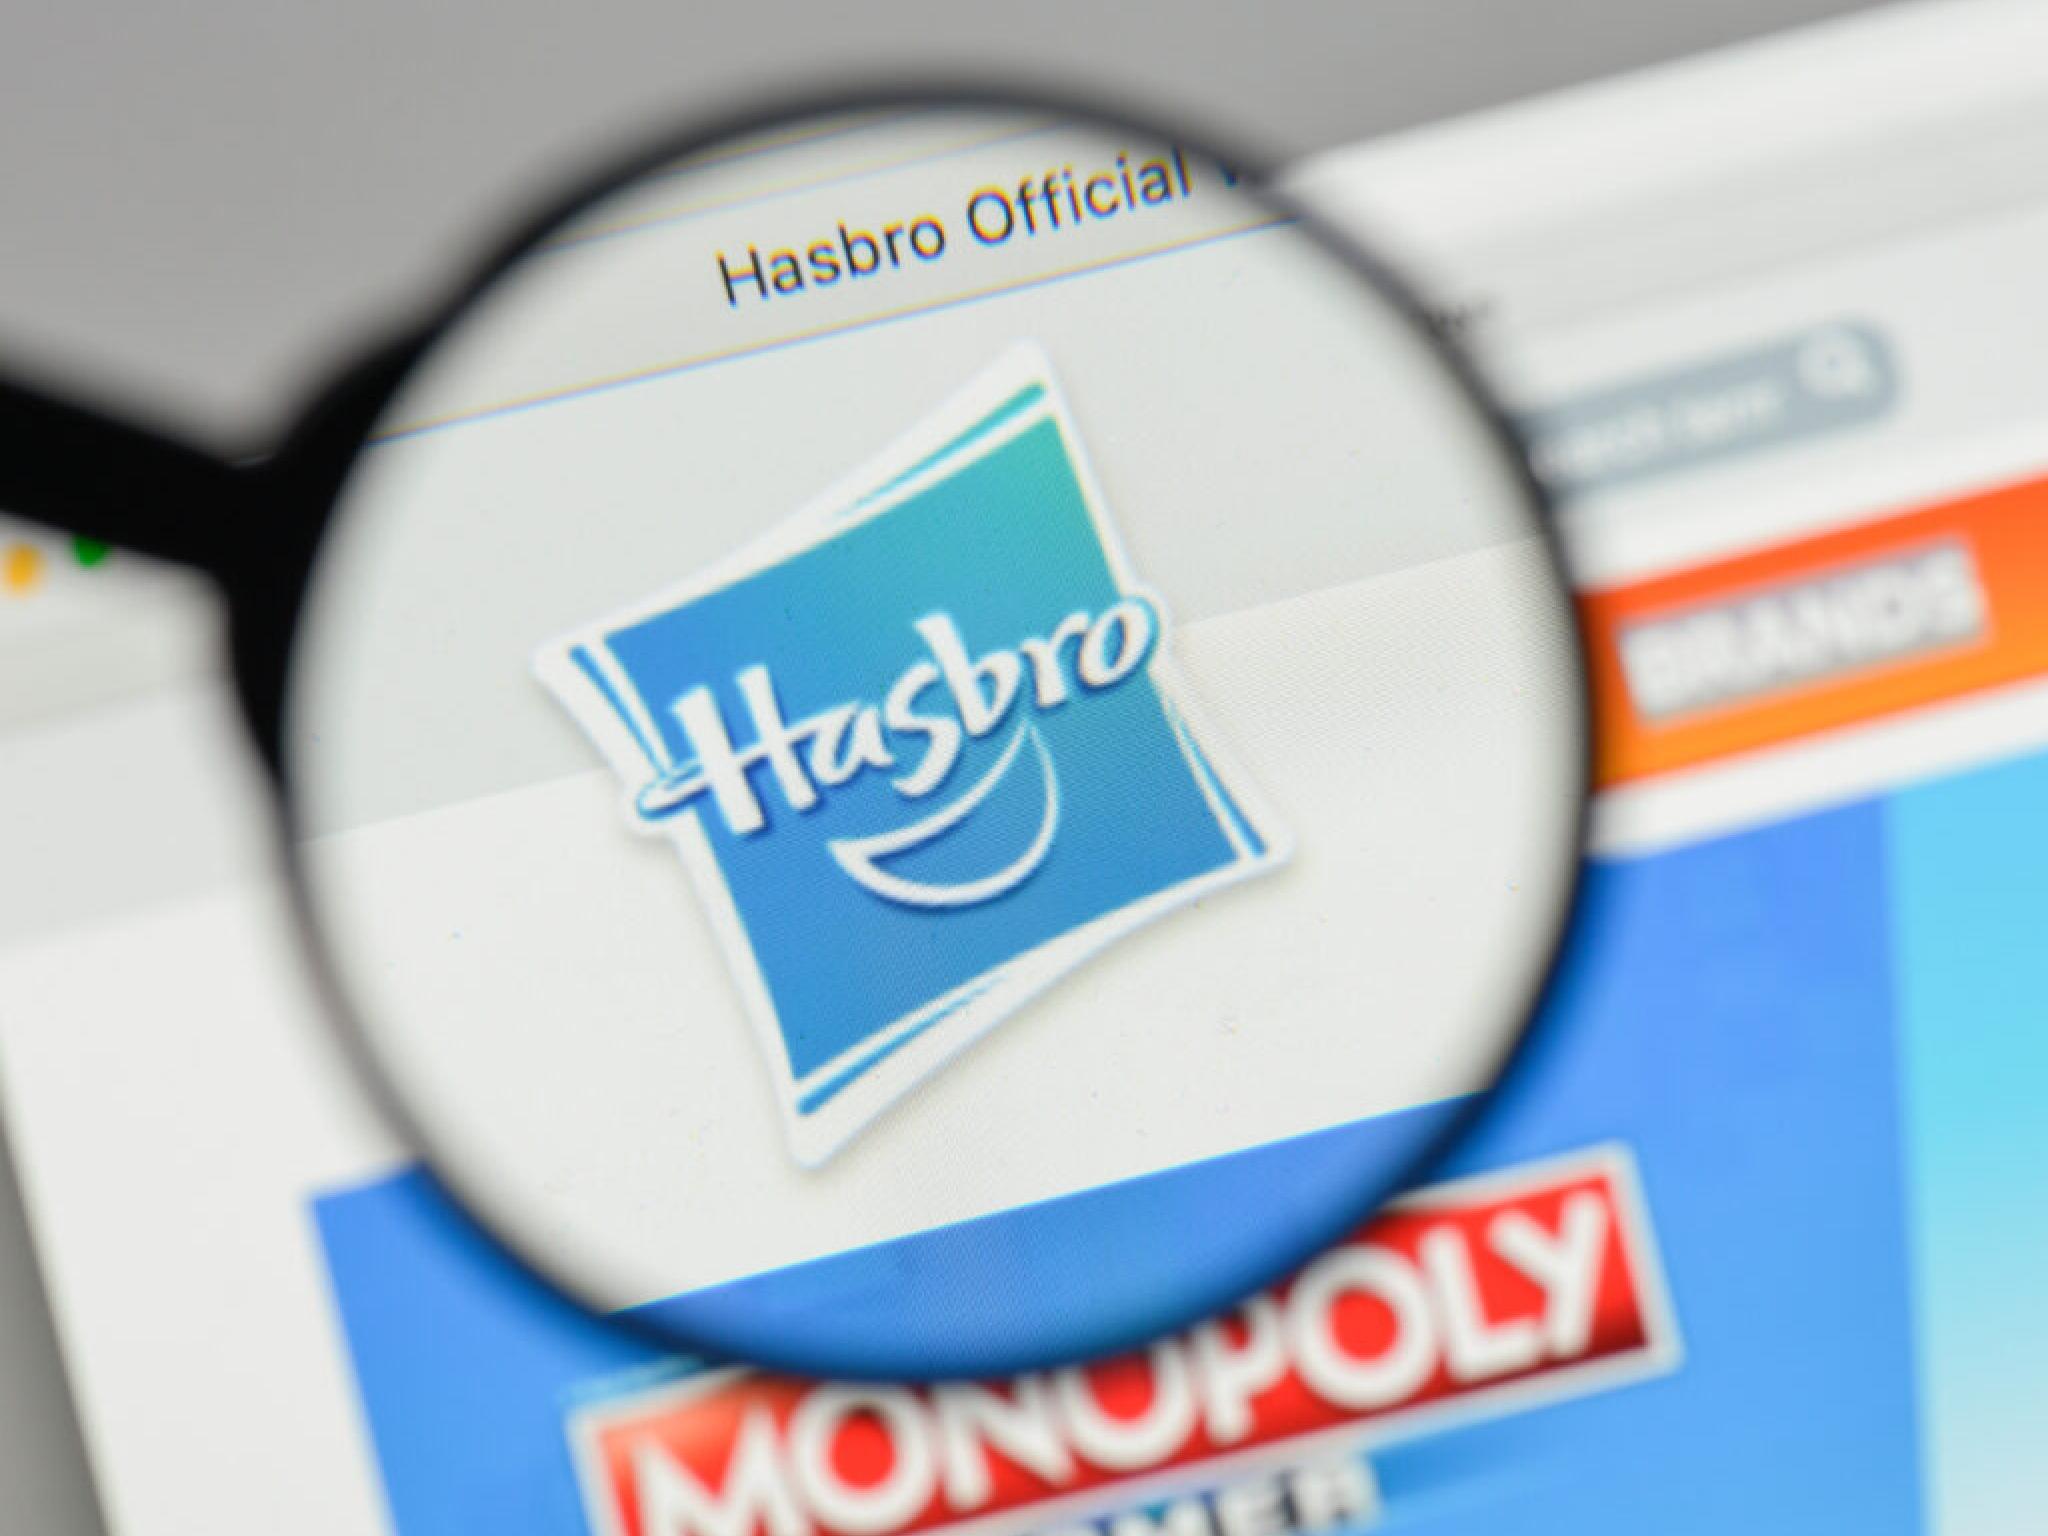  hasbro-consensus-estimates-appear-conservative-does-not-reflect-success-of-digital-gaming-strategy-says-bullish-analyst 